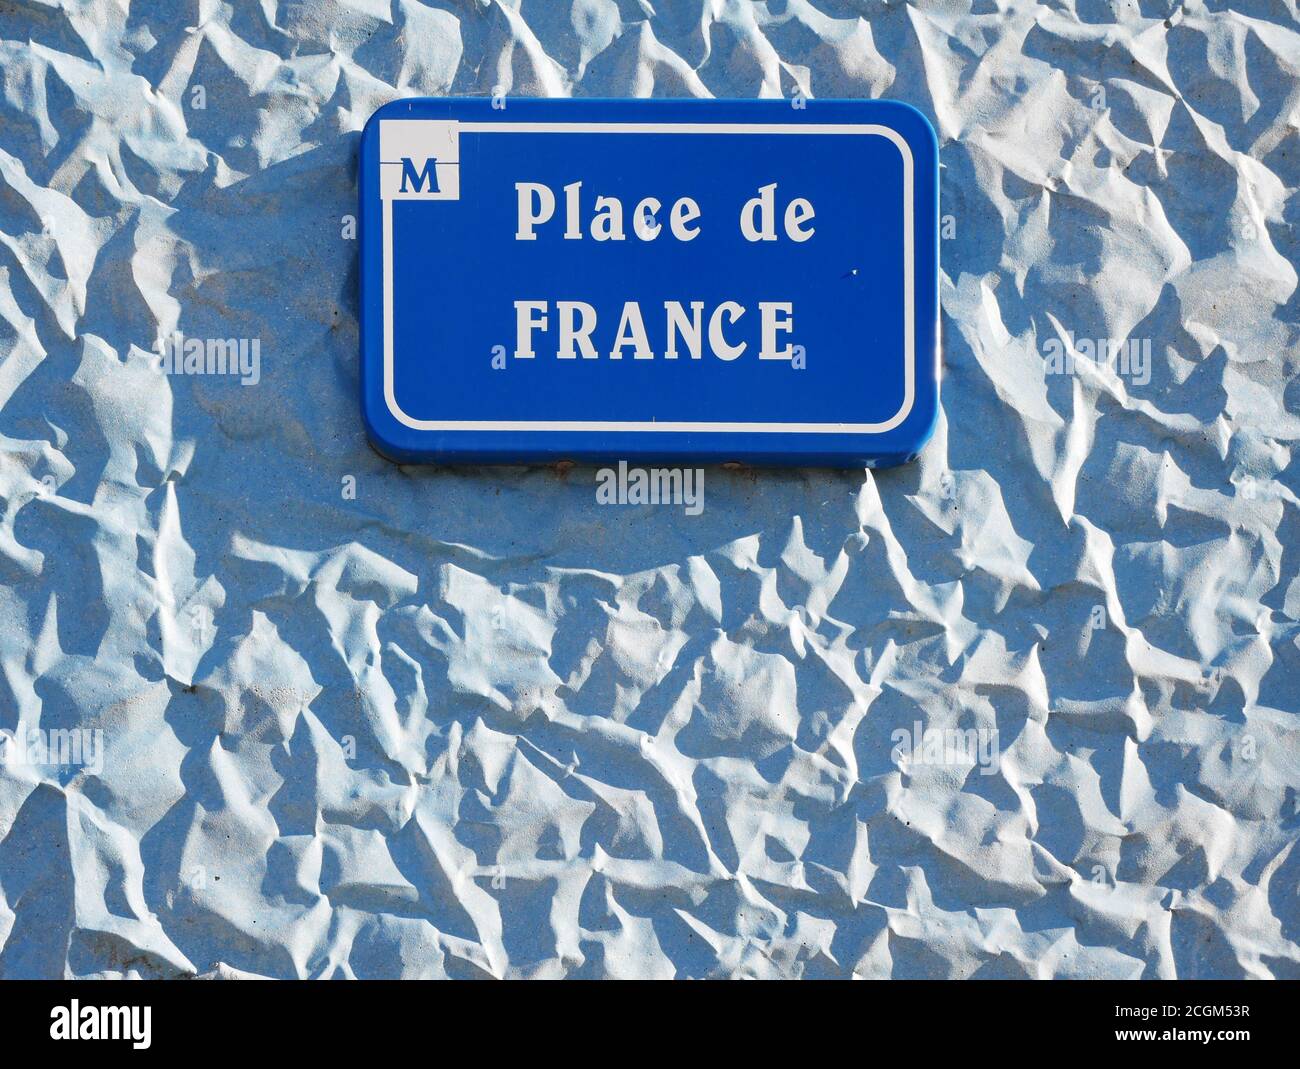 Street sign in France called 'Place de France'. Stock Photo